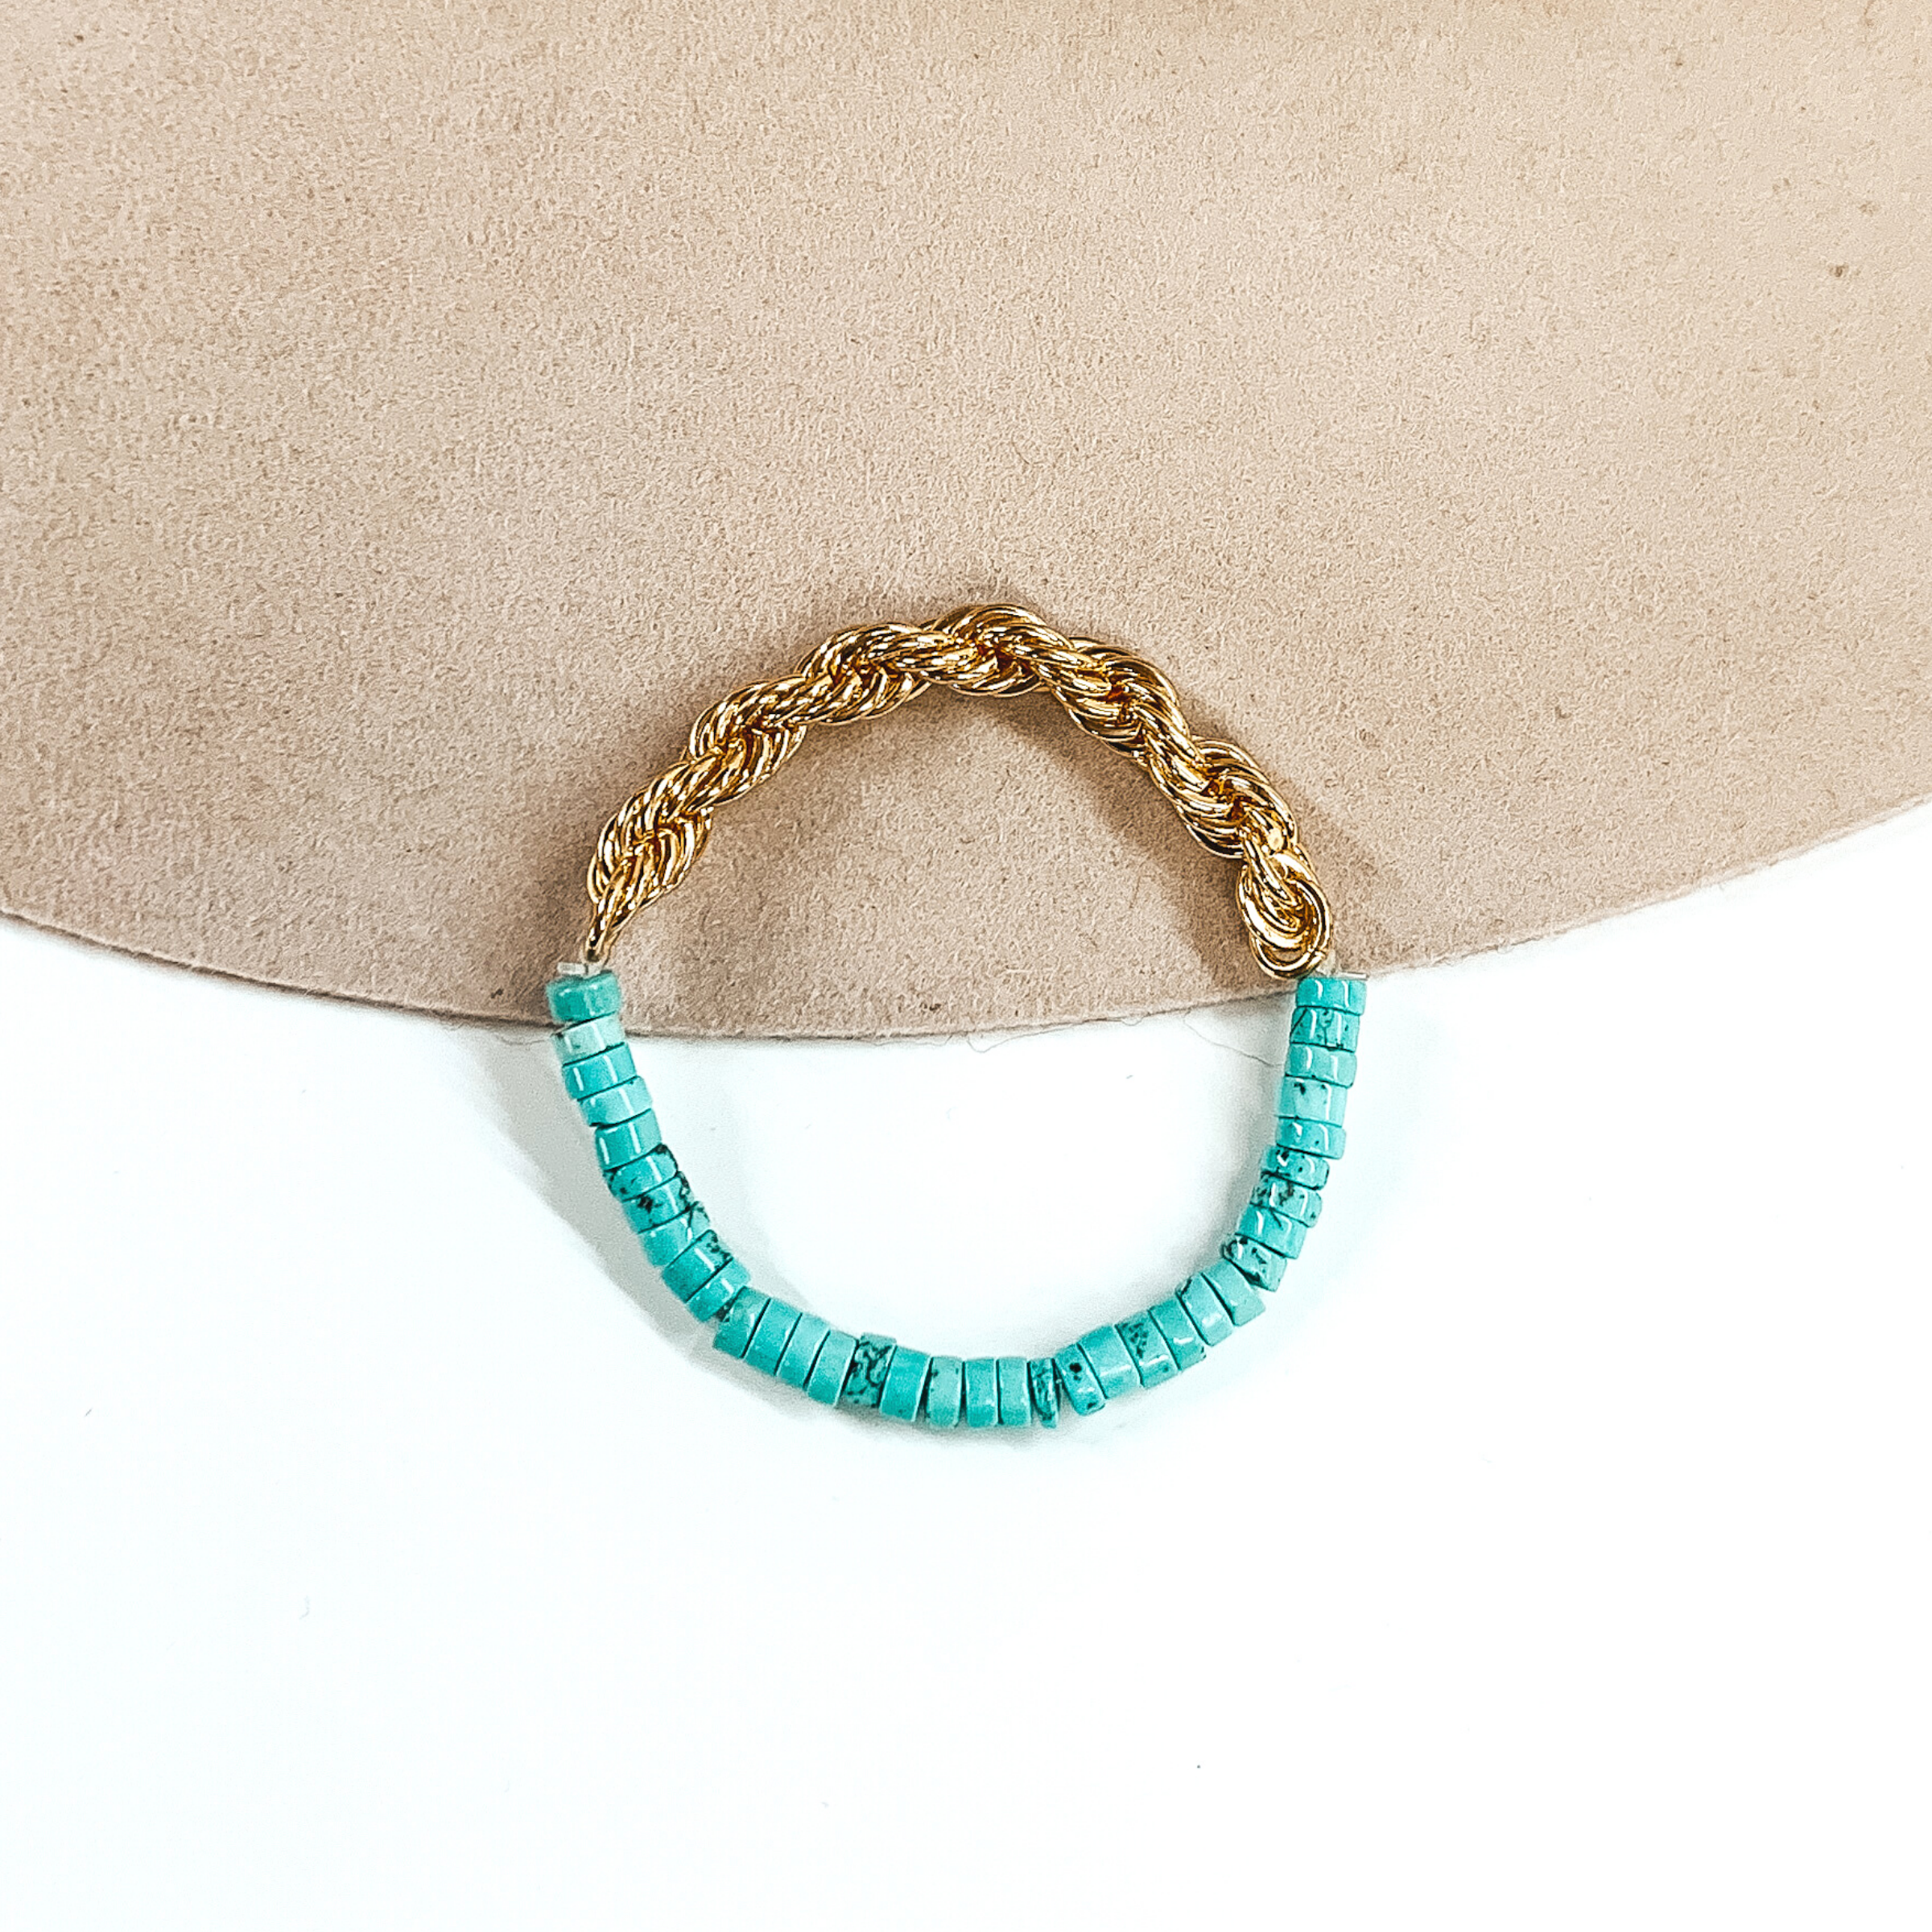 Half of the bracelet is a gold rope chain. While the other half is a turquoise pipestone beaded part. This bracelet is pictured on a white and beige background. 